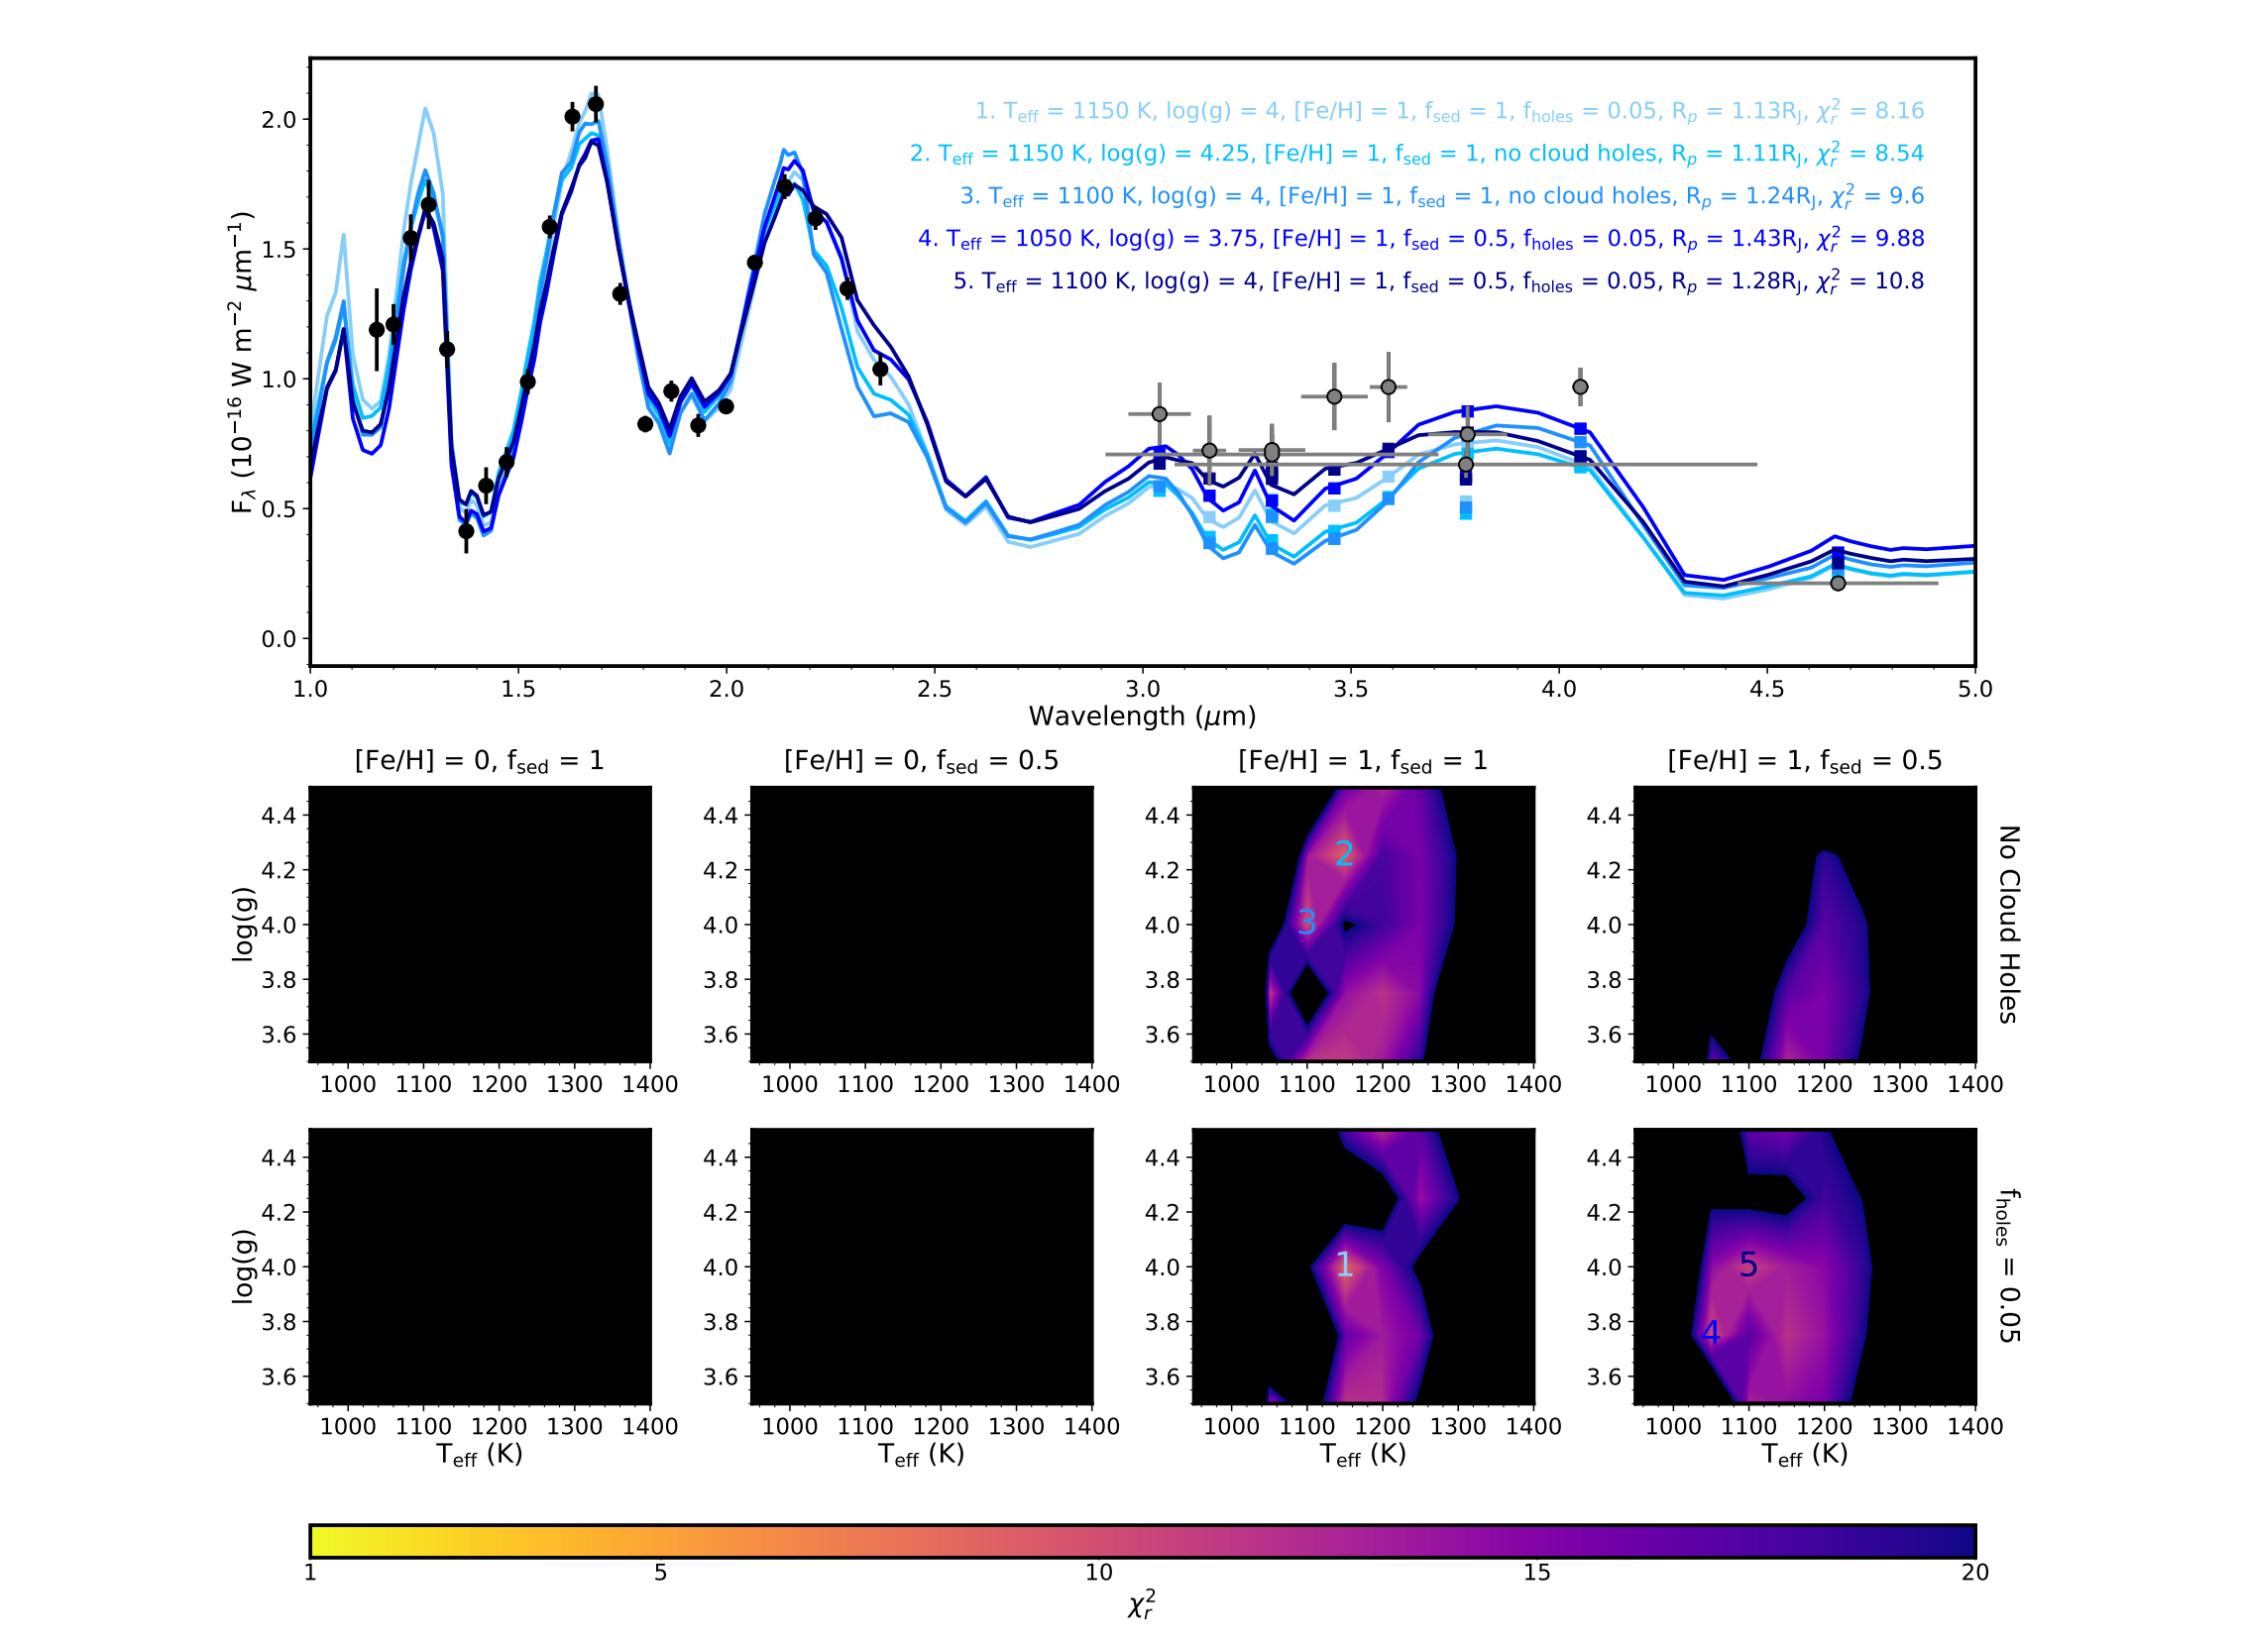 Atmospheric Monitoring and Precise Spectroscopy of the HR 8799 Planets with SCExAO/CHARIS